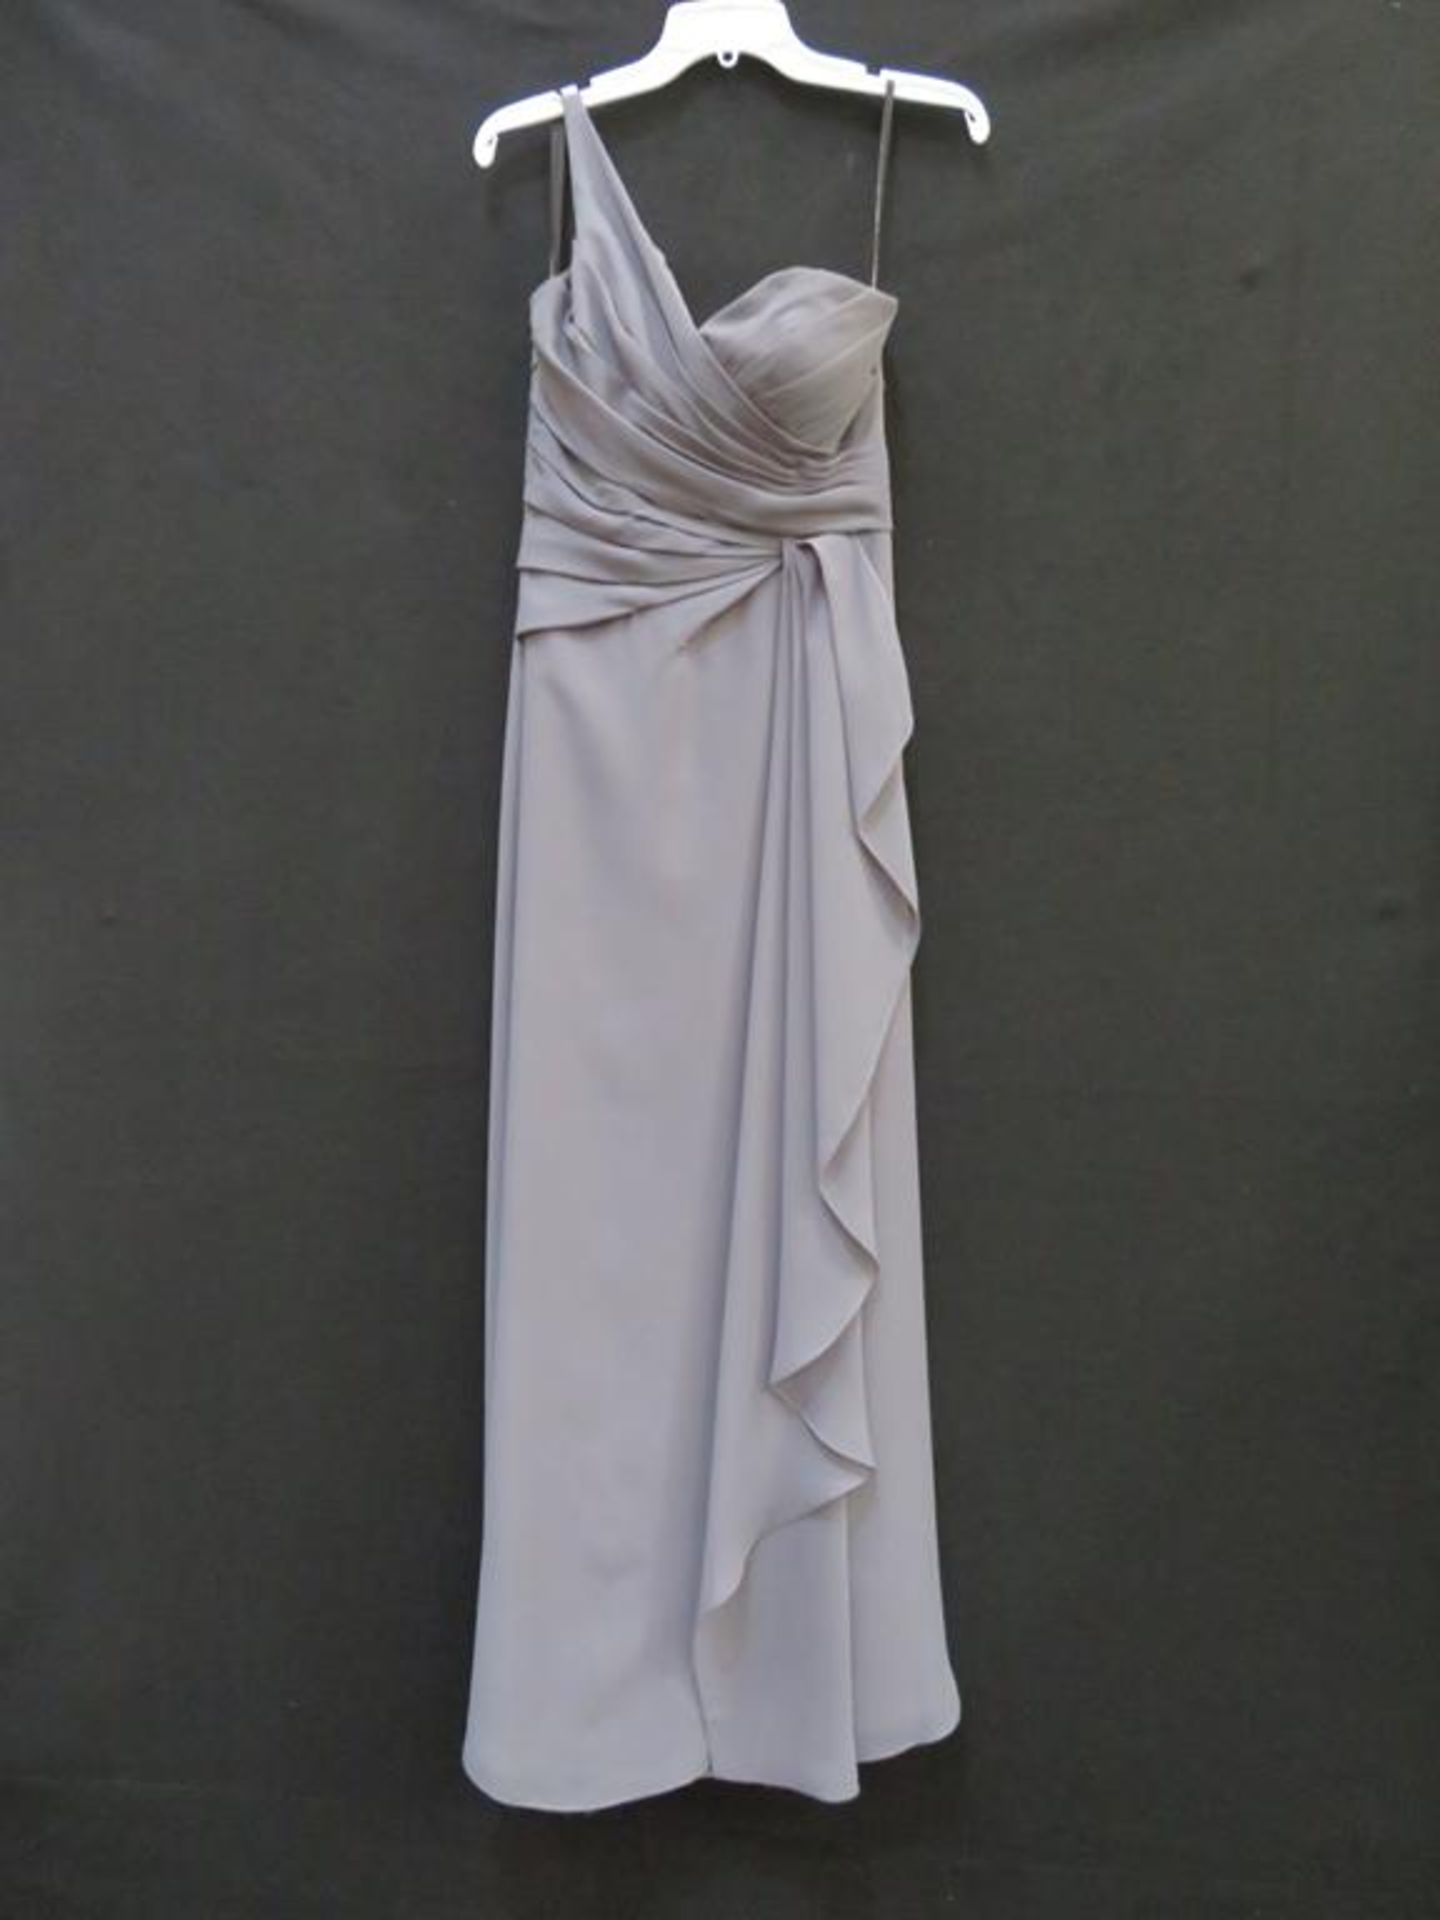 Five 'Charcoal/Pewter' Bridal Gowns in various styles - Image 12 of 29